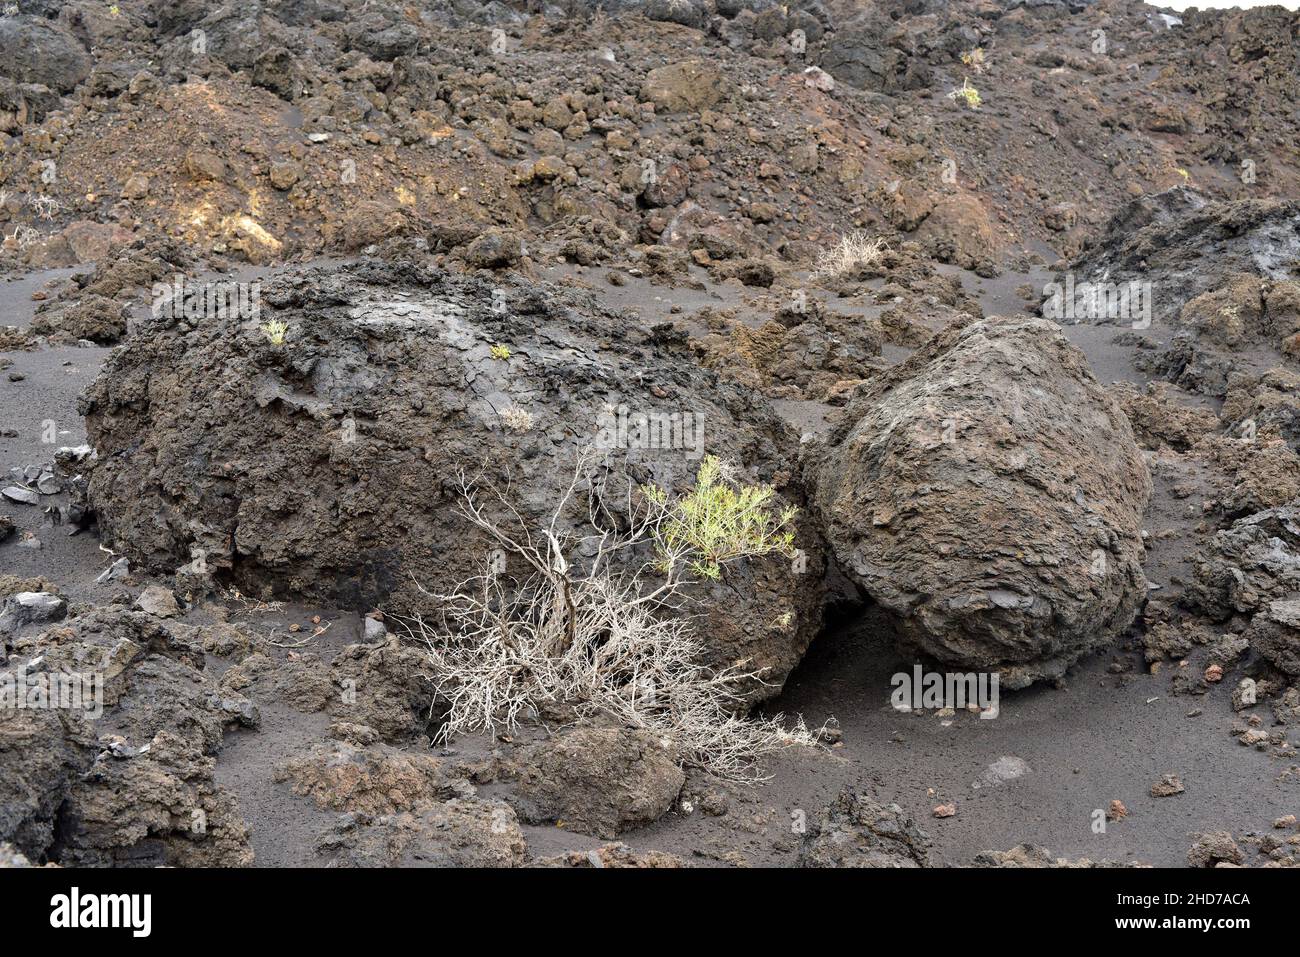 Volcanic bombs (tephra) expelled by Teneguia volcano. This photo was taken in Fuencaliente, La Palma, Canary Islands, Spain. Stock Photo